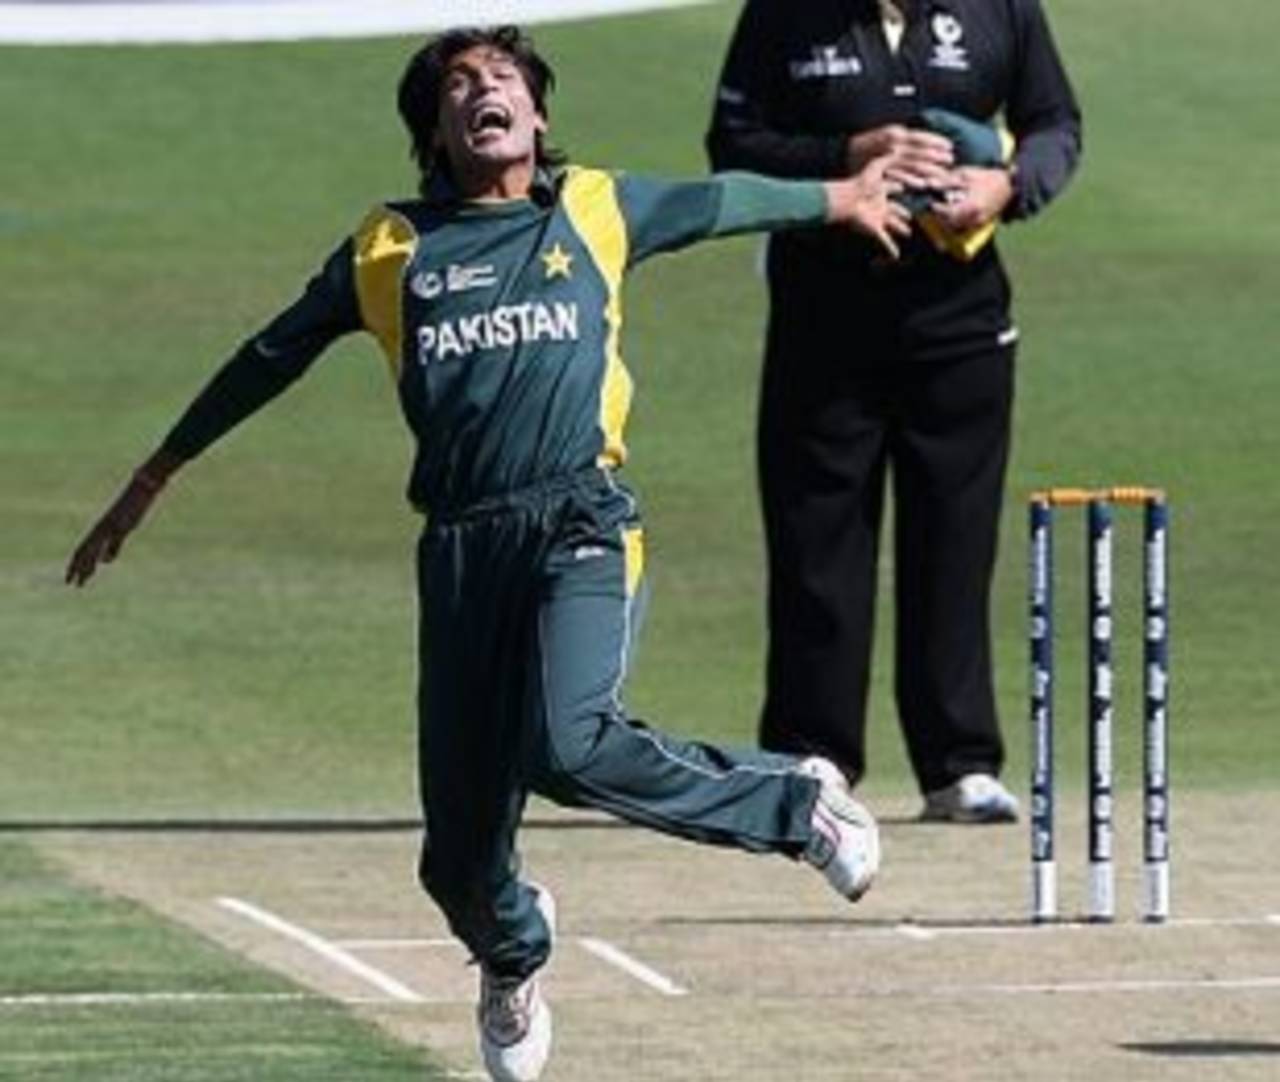 Mohammad Aamer celebrates an early wicket, Pakistan v West Indies, Champions Trophy, Group A, Johannesburg, September 23, 2009